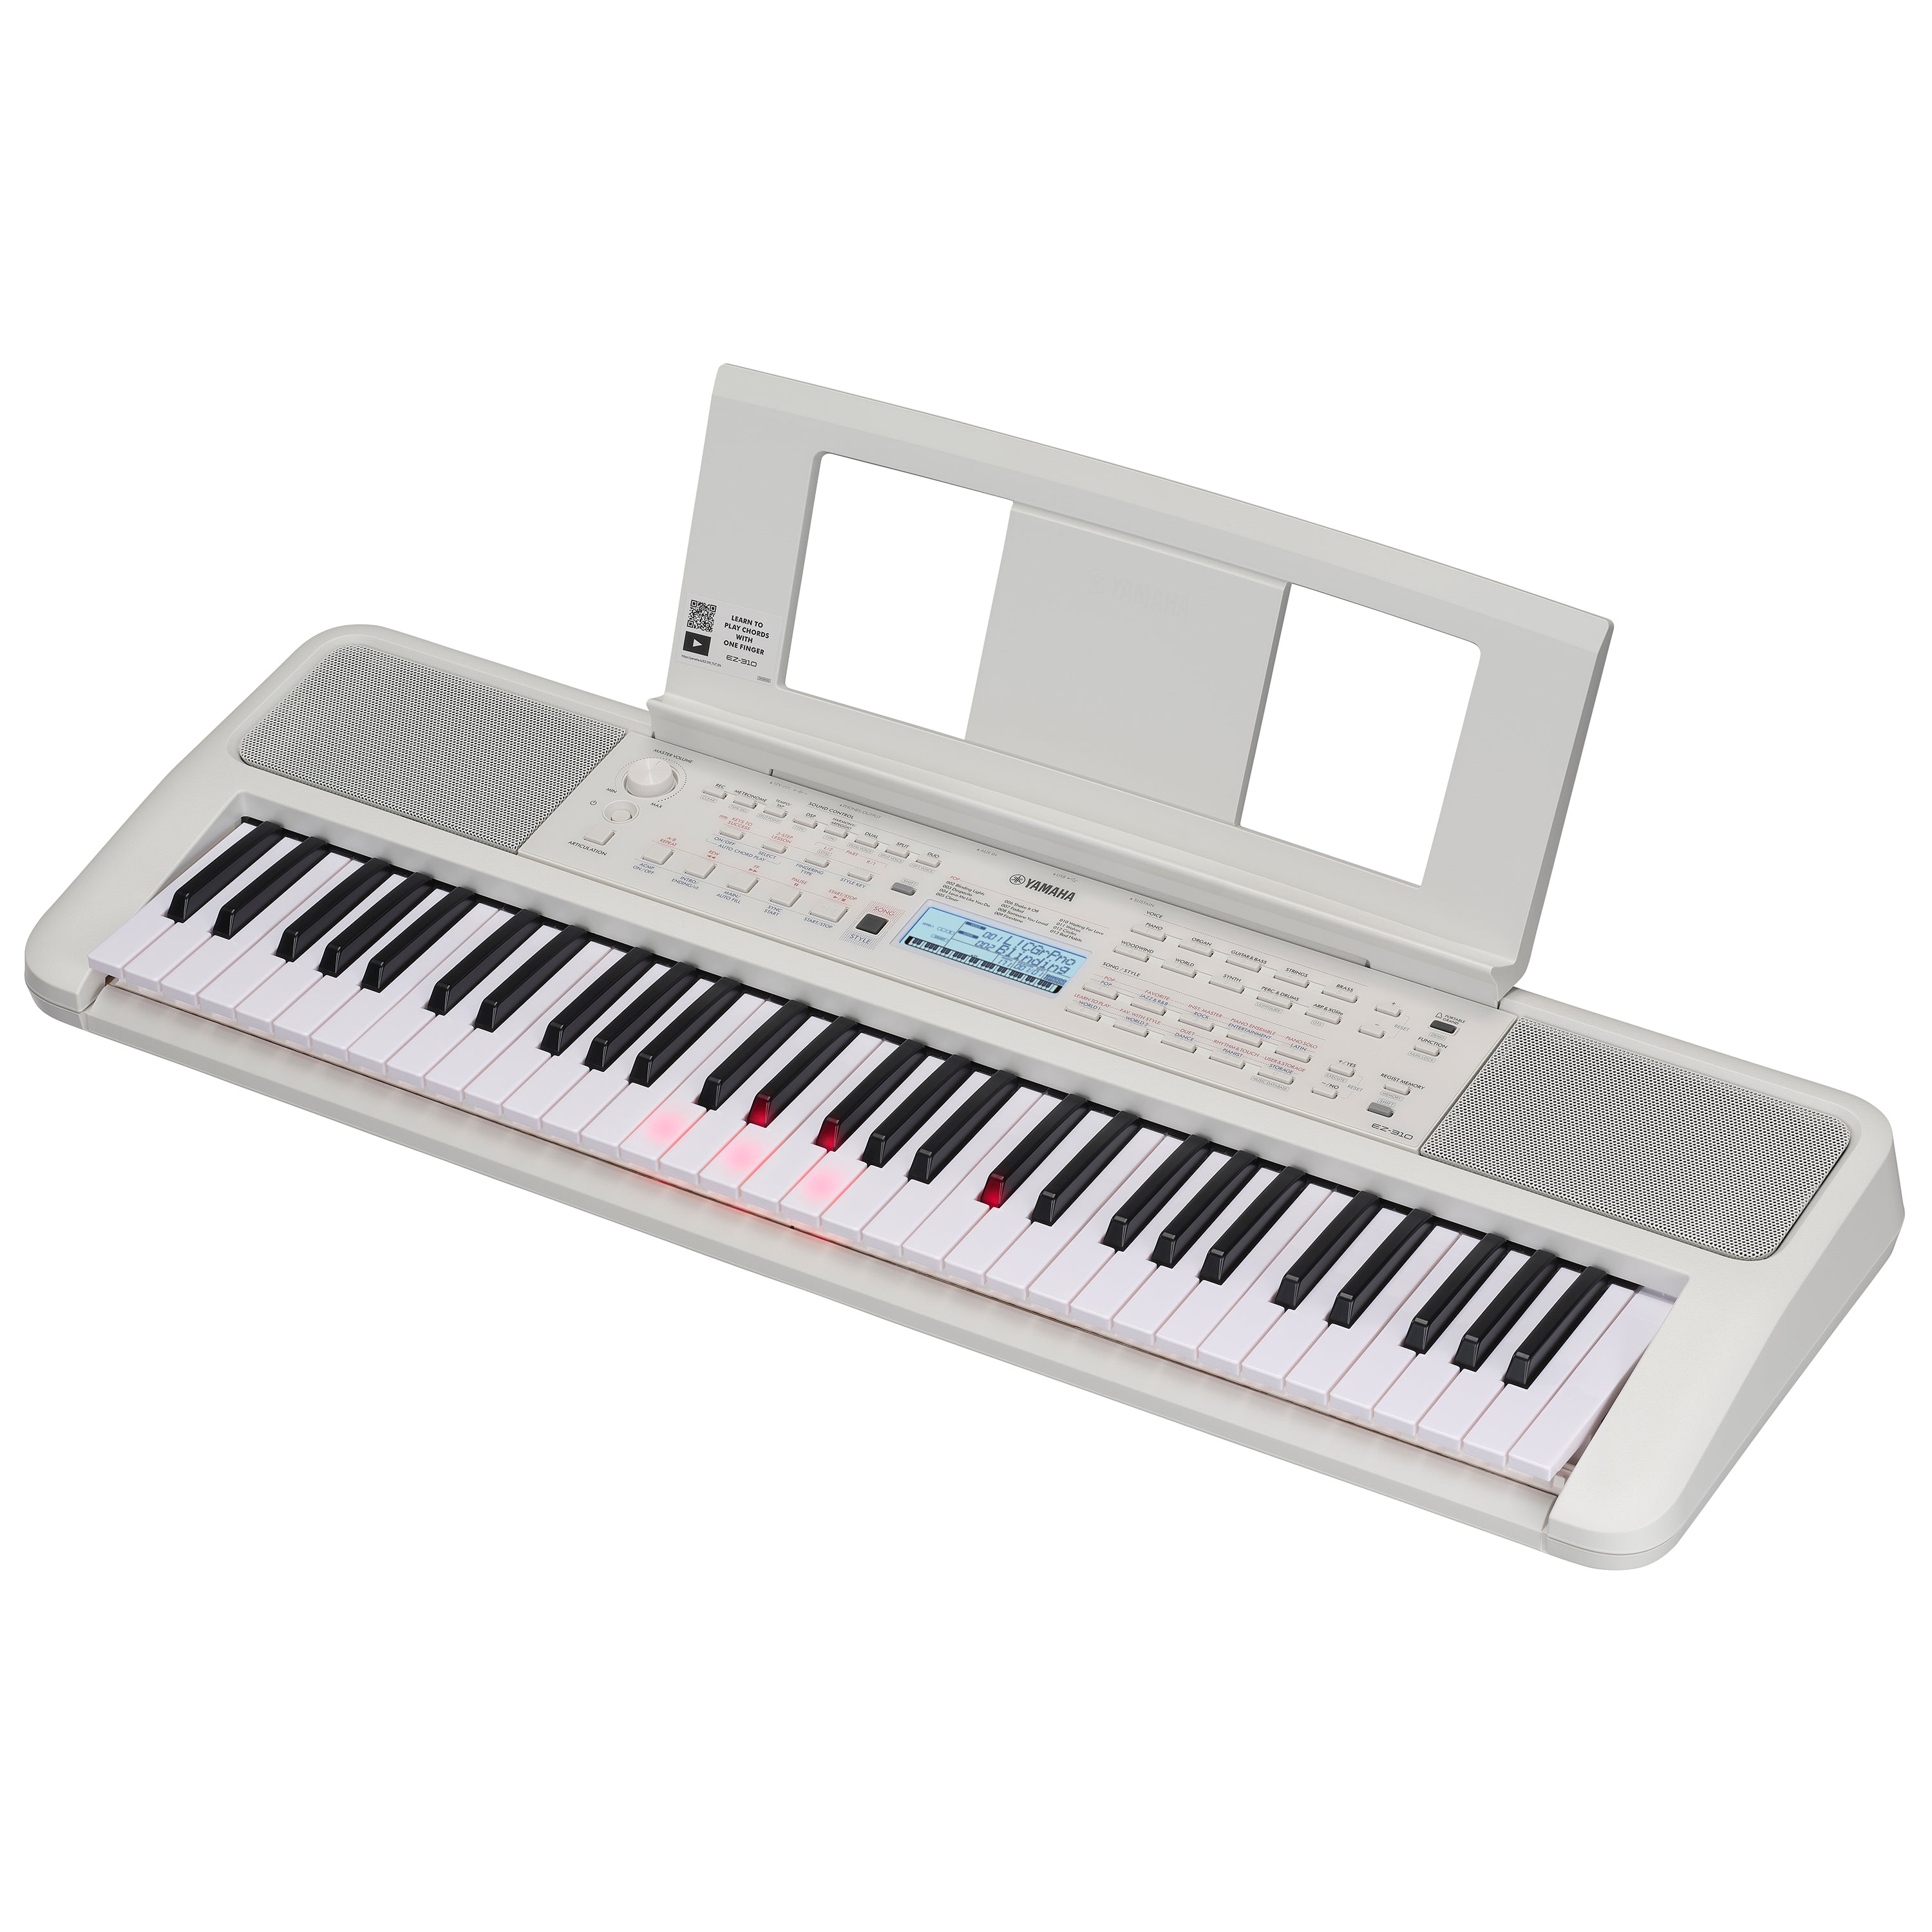 Yamaha EZ310 Portable Keyboard with Lighted Keys, View 1